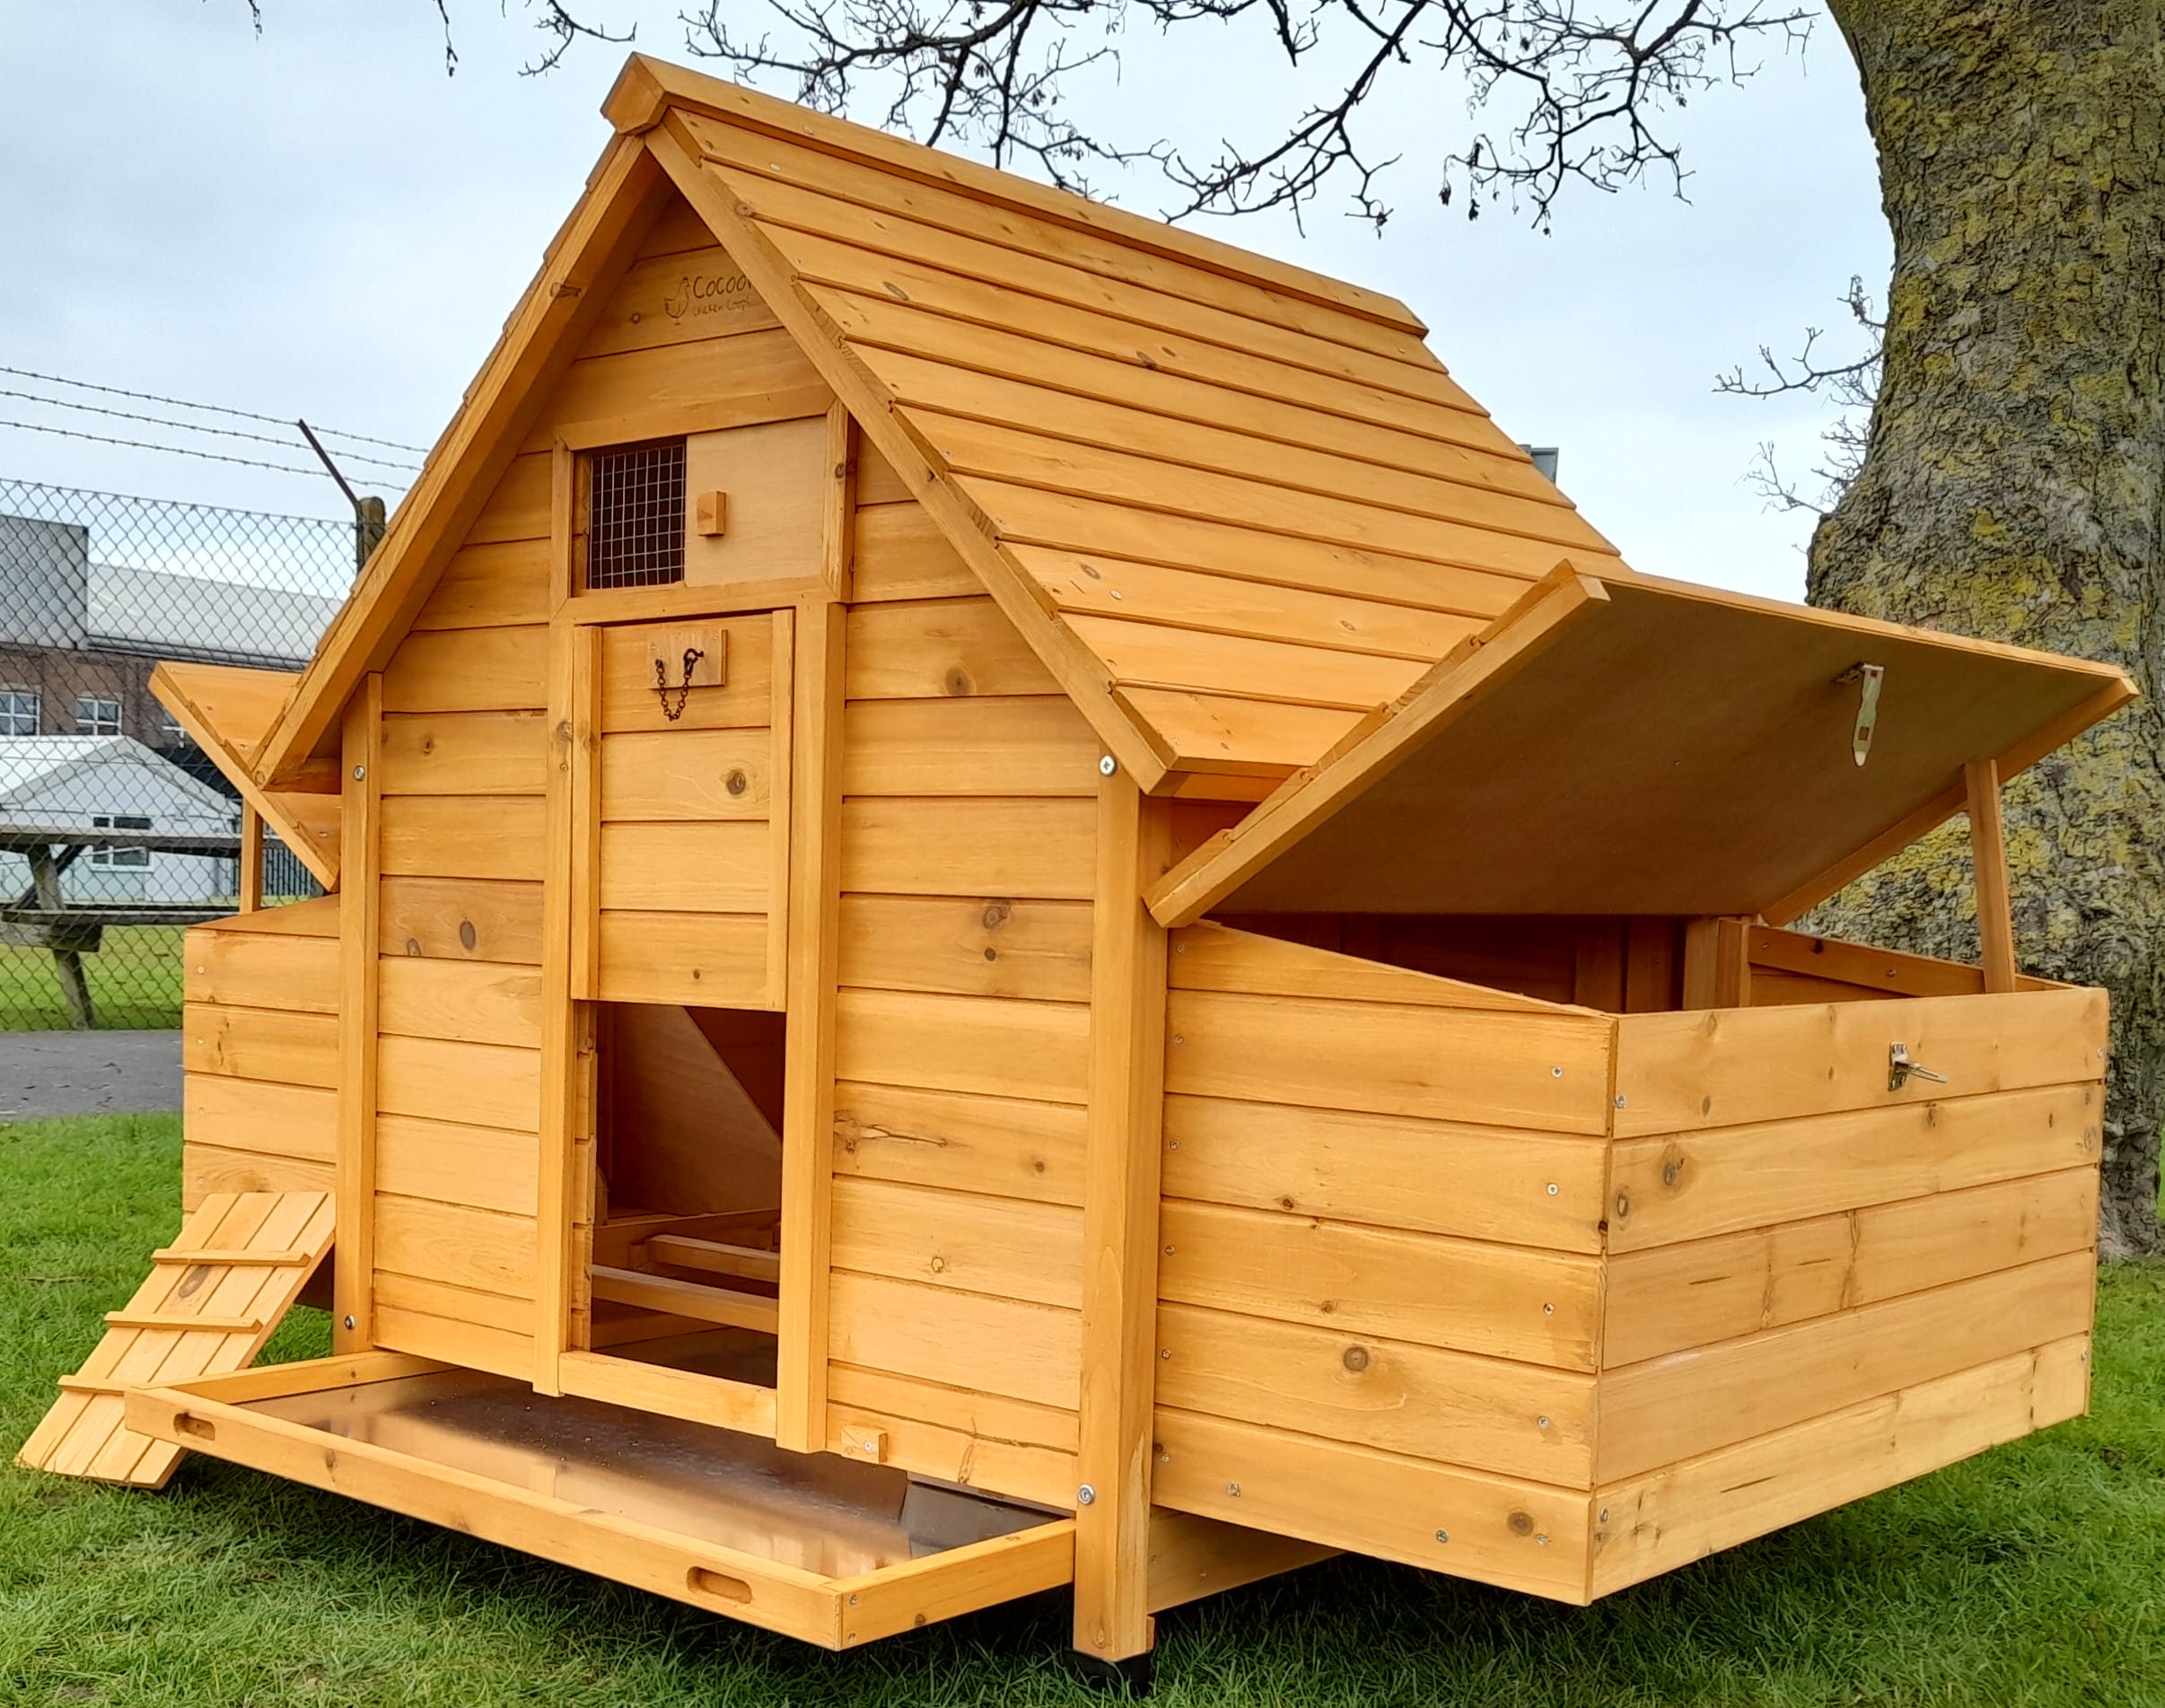 House design chicken coop with two nest boxes that have opening roofs